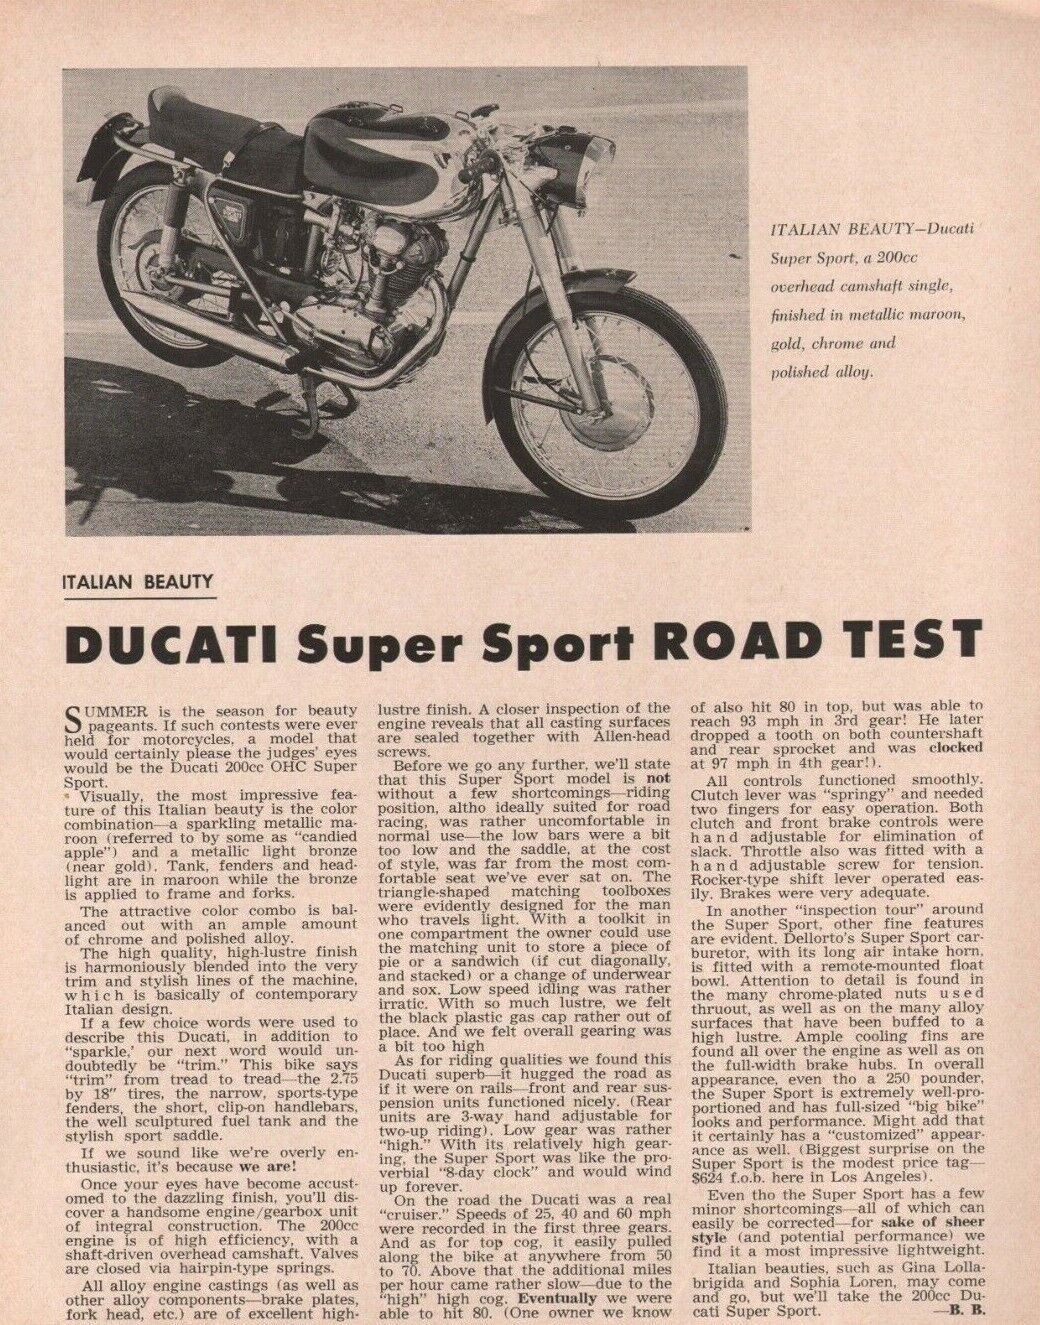 1959 Ducati Super Sport Road Test - 1-Page Vintage Motorcycle Article